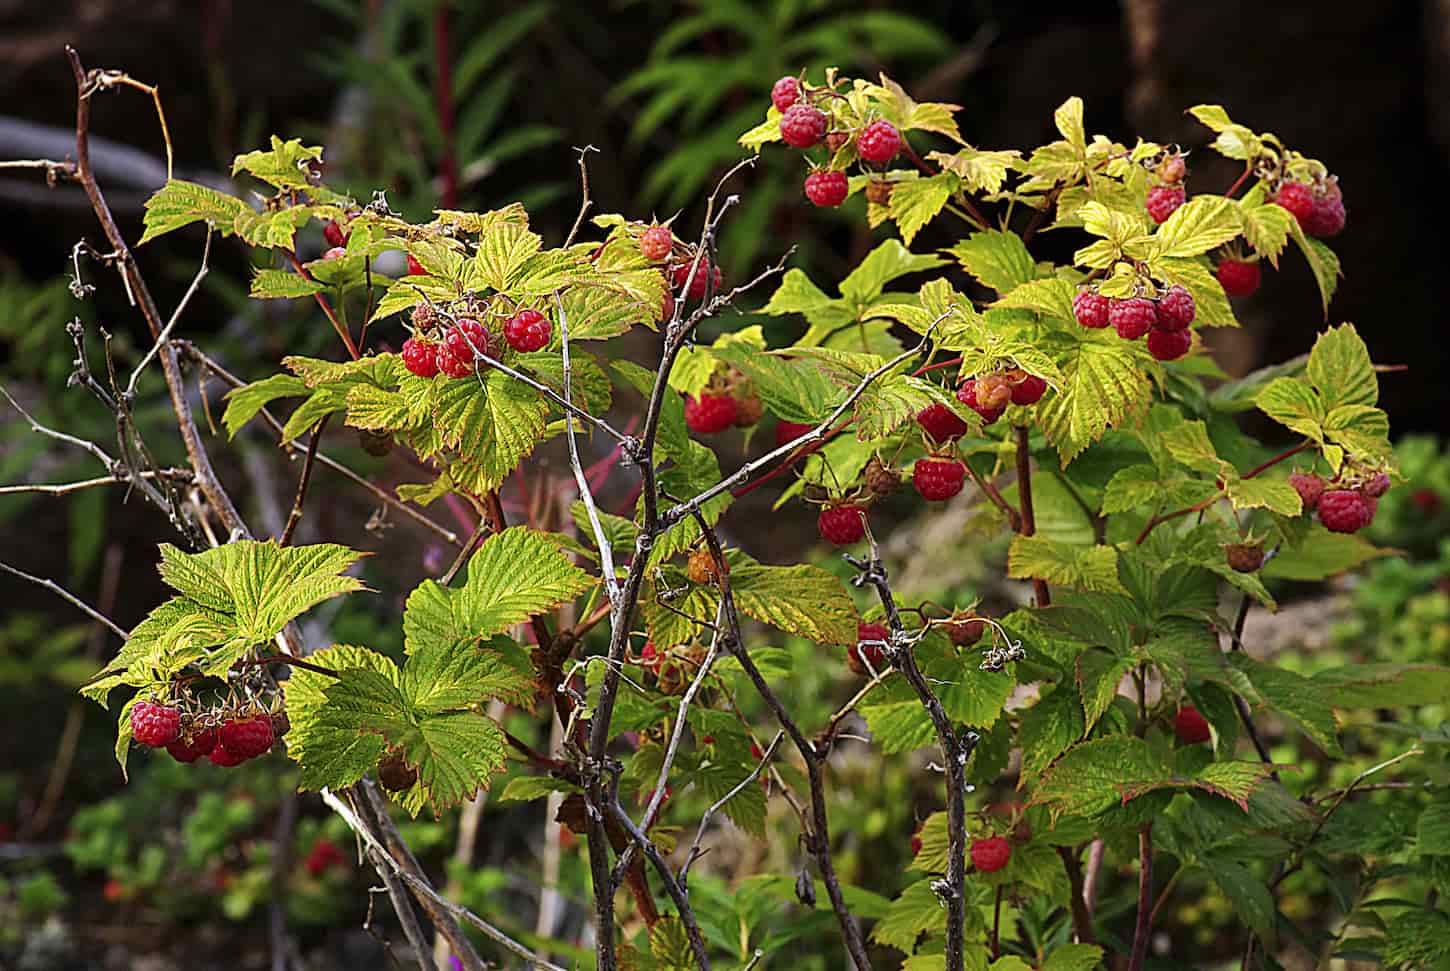 An image of a raspberry bush with bright ripe berries in the forest.